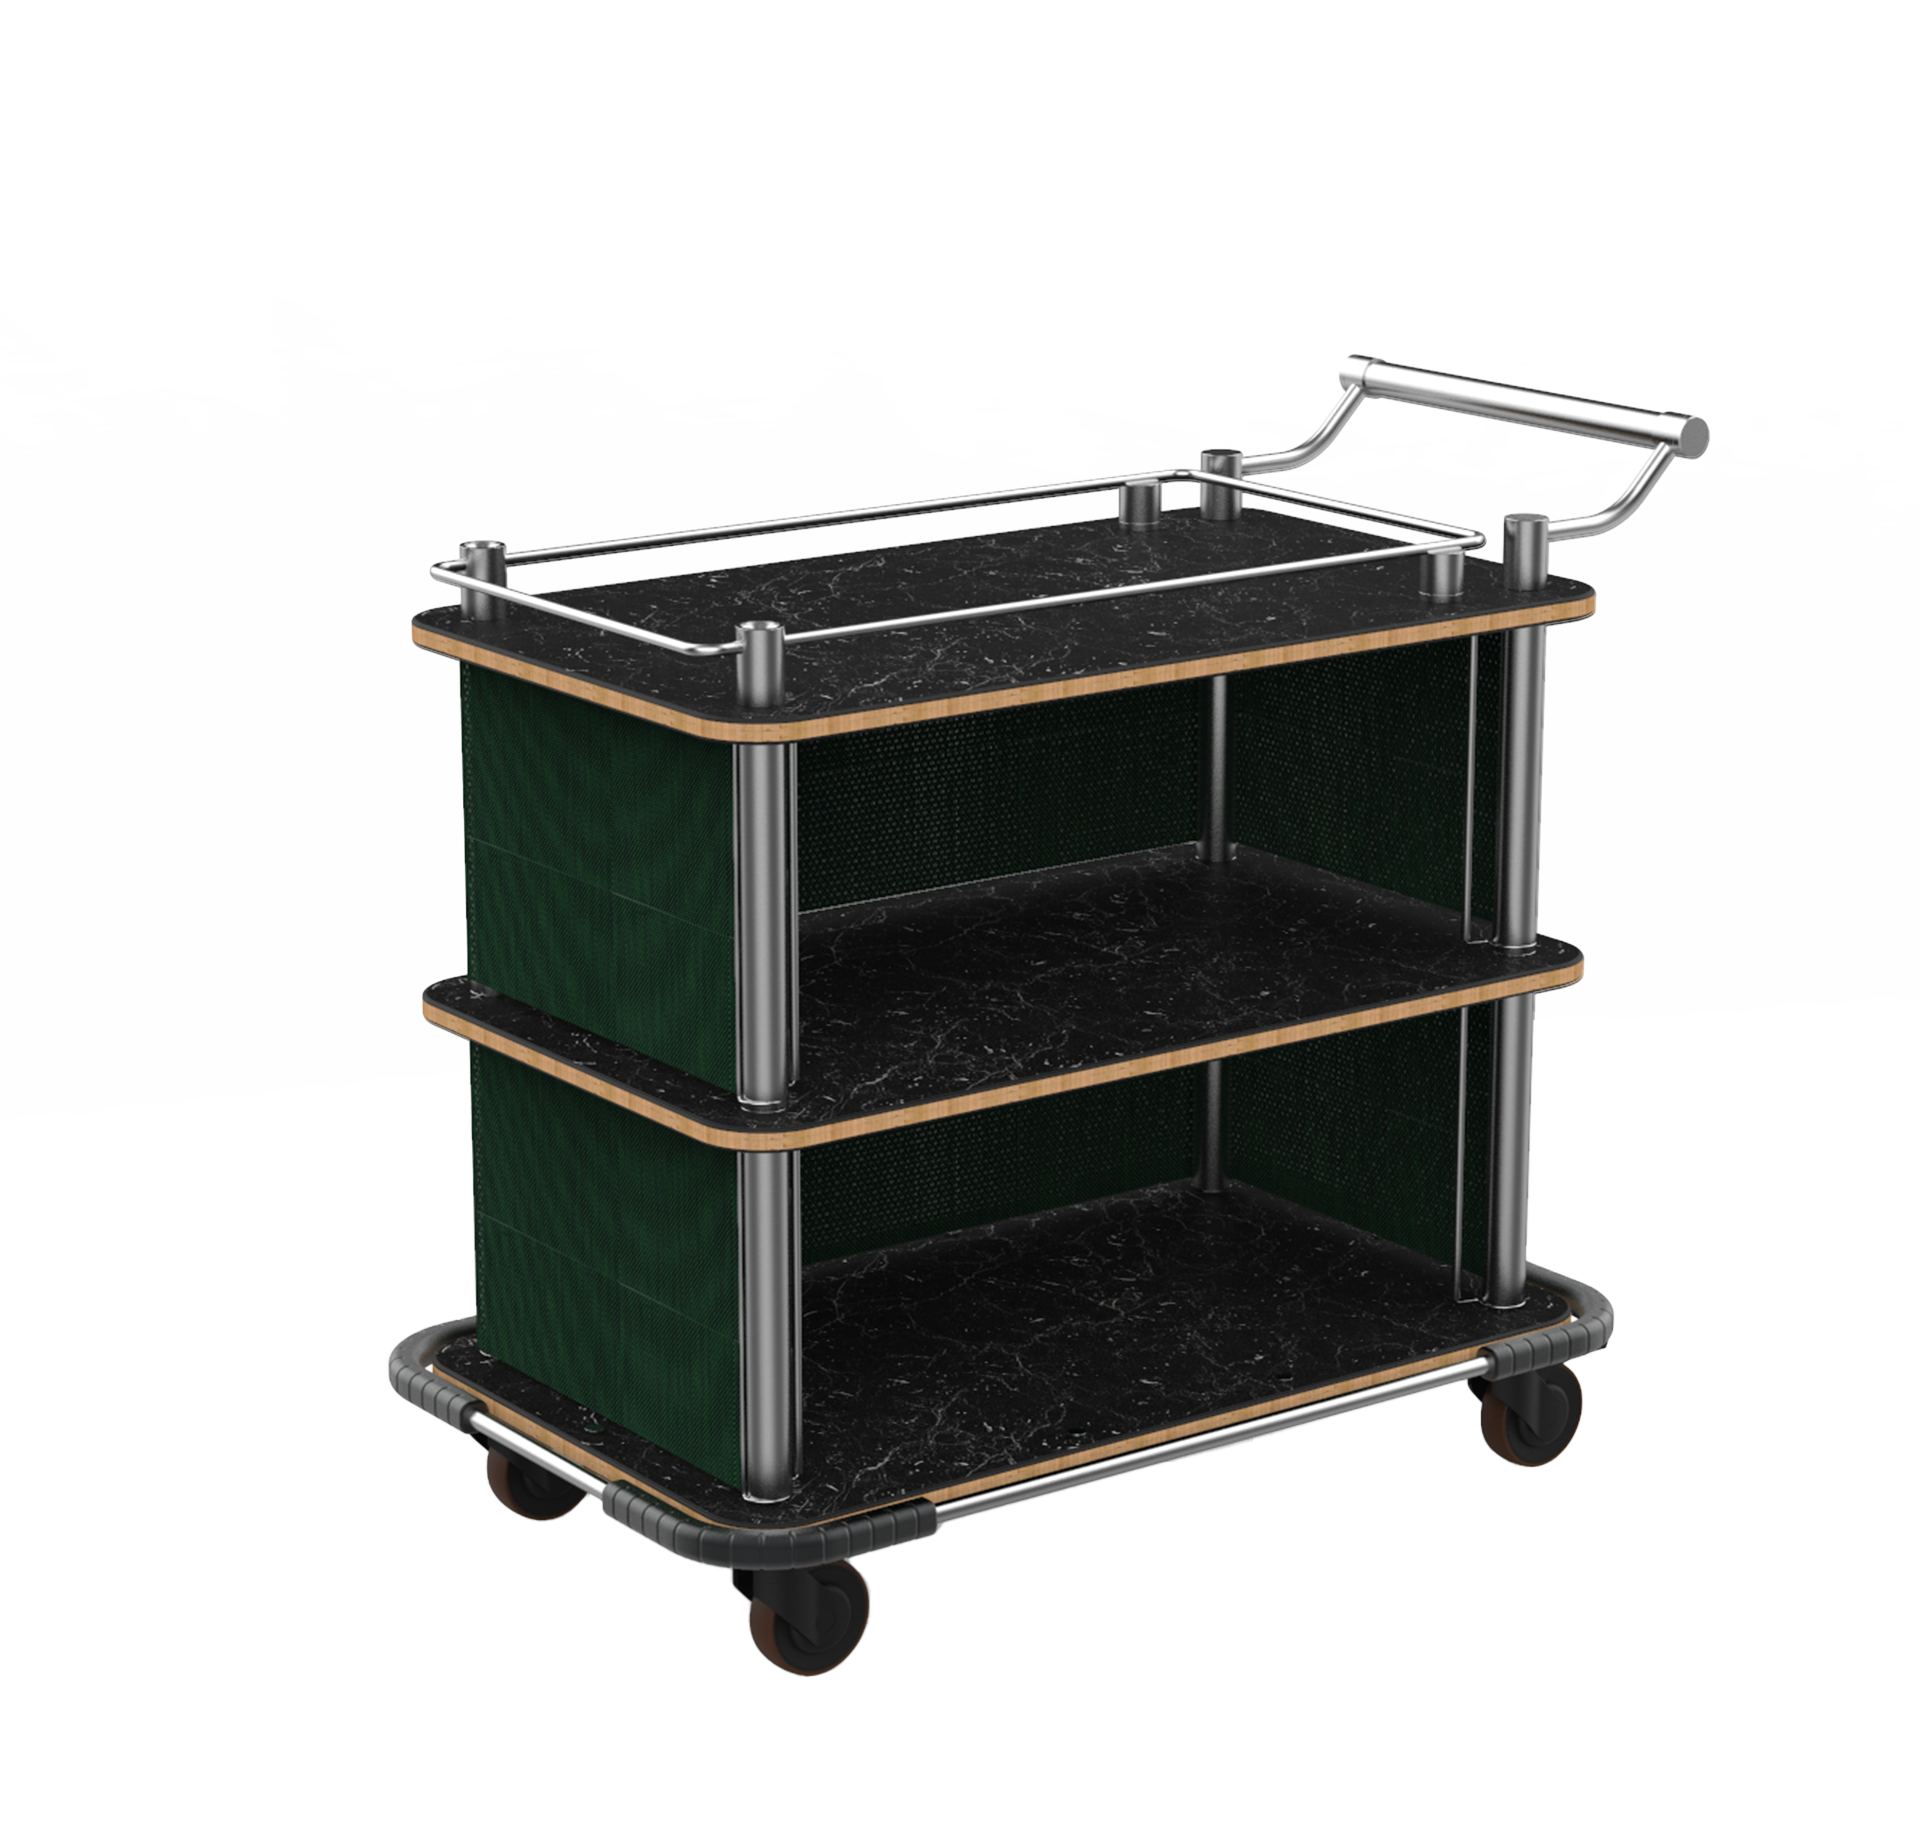 TOP BORDER CART WITH STAINLESS STEEL HANDLE AND HEAVY DUTY BUMPER